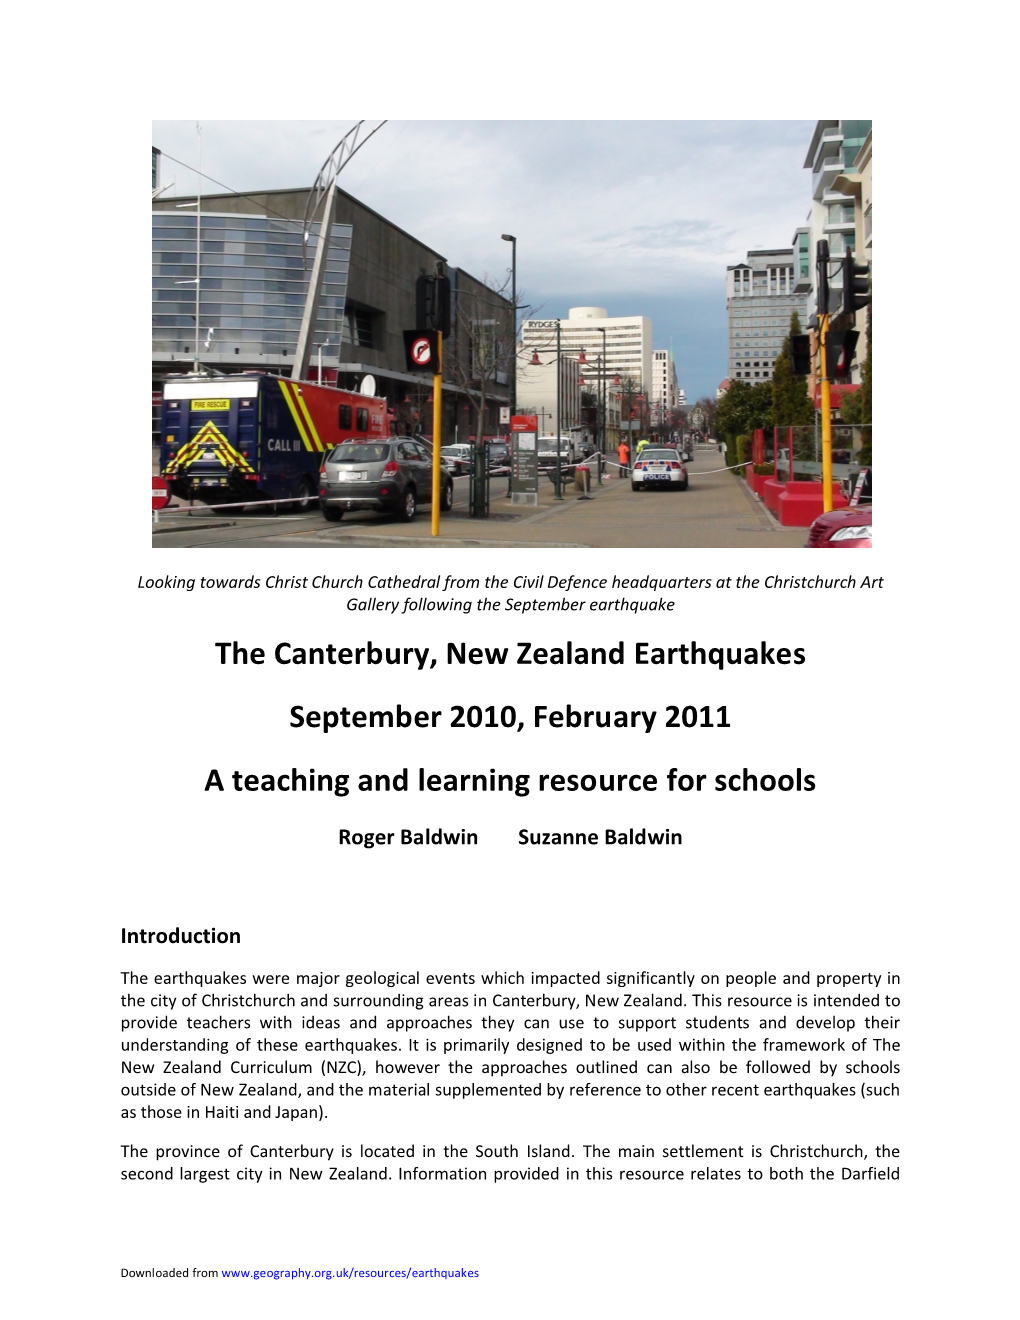 The Canterbury, New Zealand Earthquakes September 2010, February 2011 a Teaching and Learning Resource for Schools